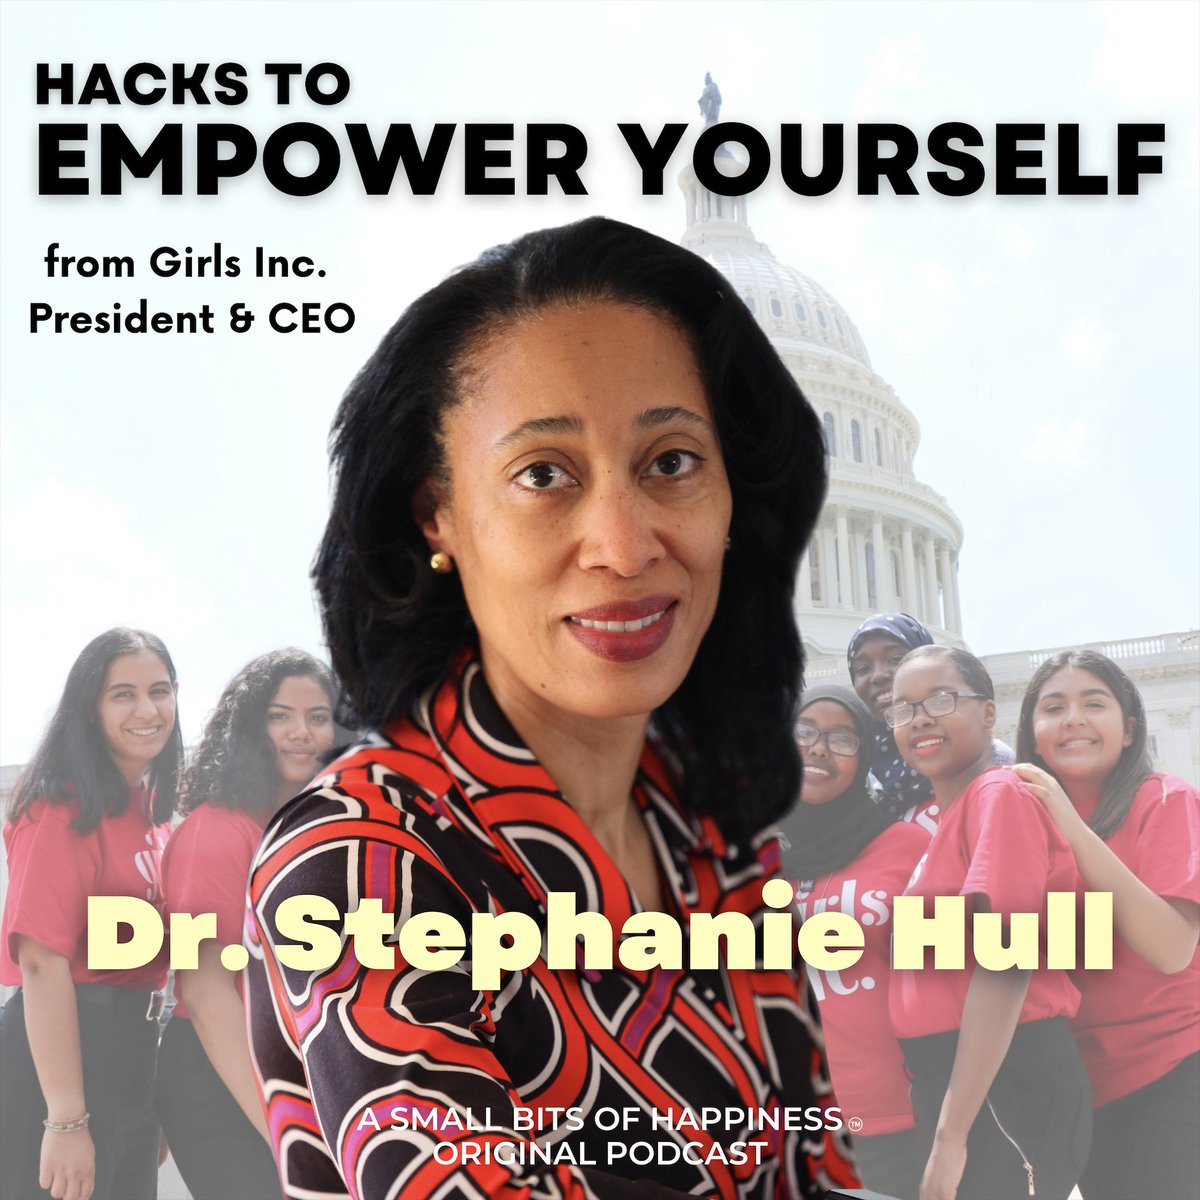 Our very own Girls Inc. President & CEO, Stephanie Hull, recently joined the Canadian Teen Podcast 'Hack Your Happiness' to share her incredible professional journey & thoughts on how to hack your happiness. Tune in on Spotify & Apple today!